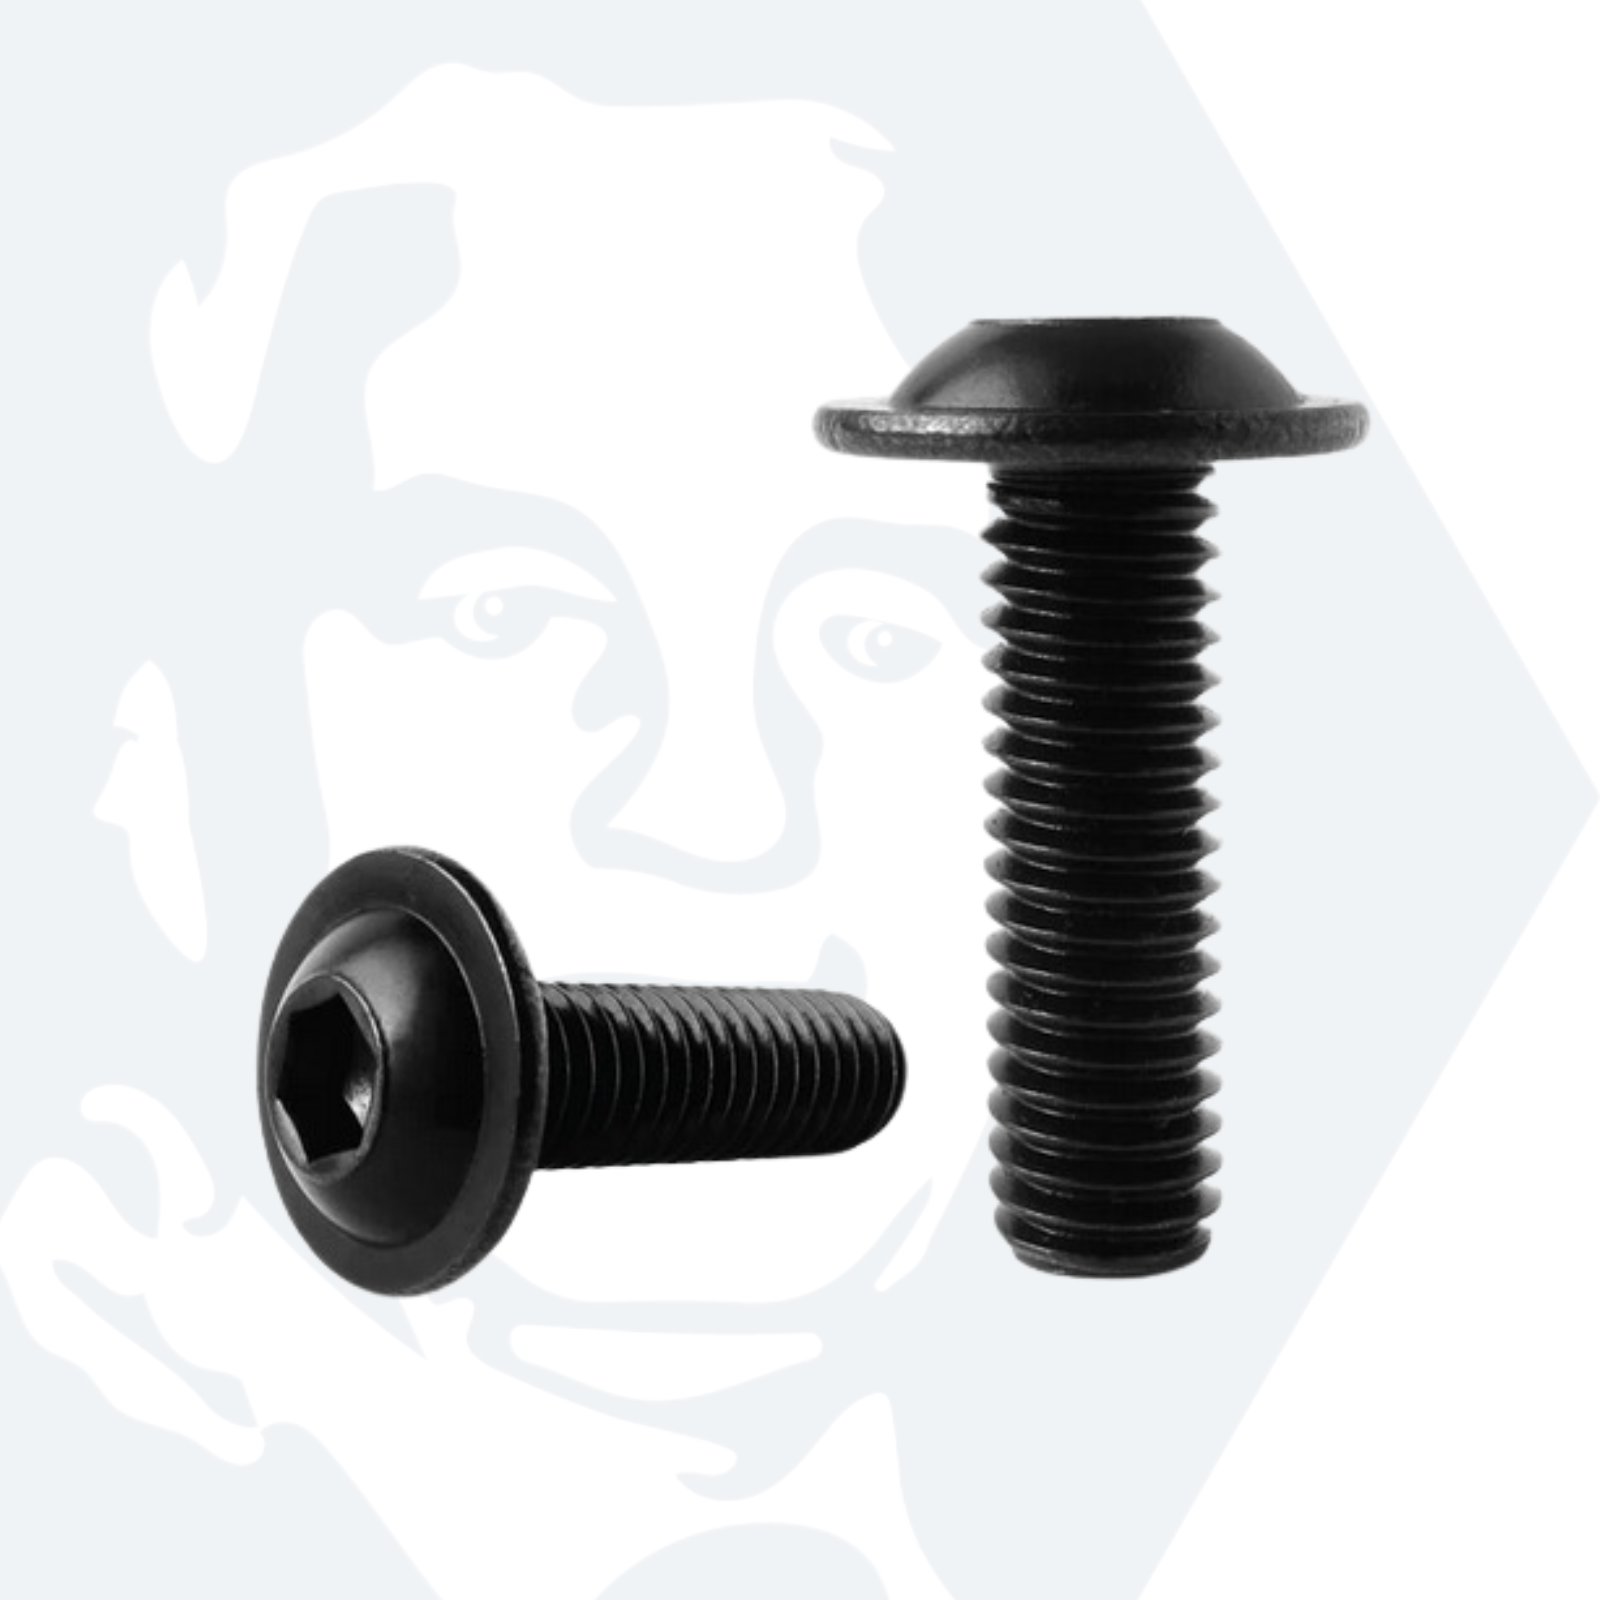 M4 Flange Socket Button Screws (ISO 7380-2) - Black Stainless Steel (A2)